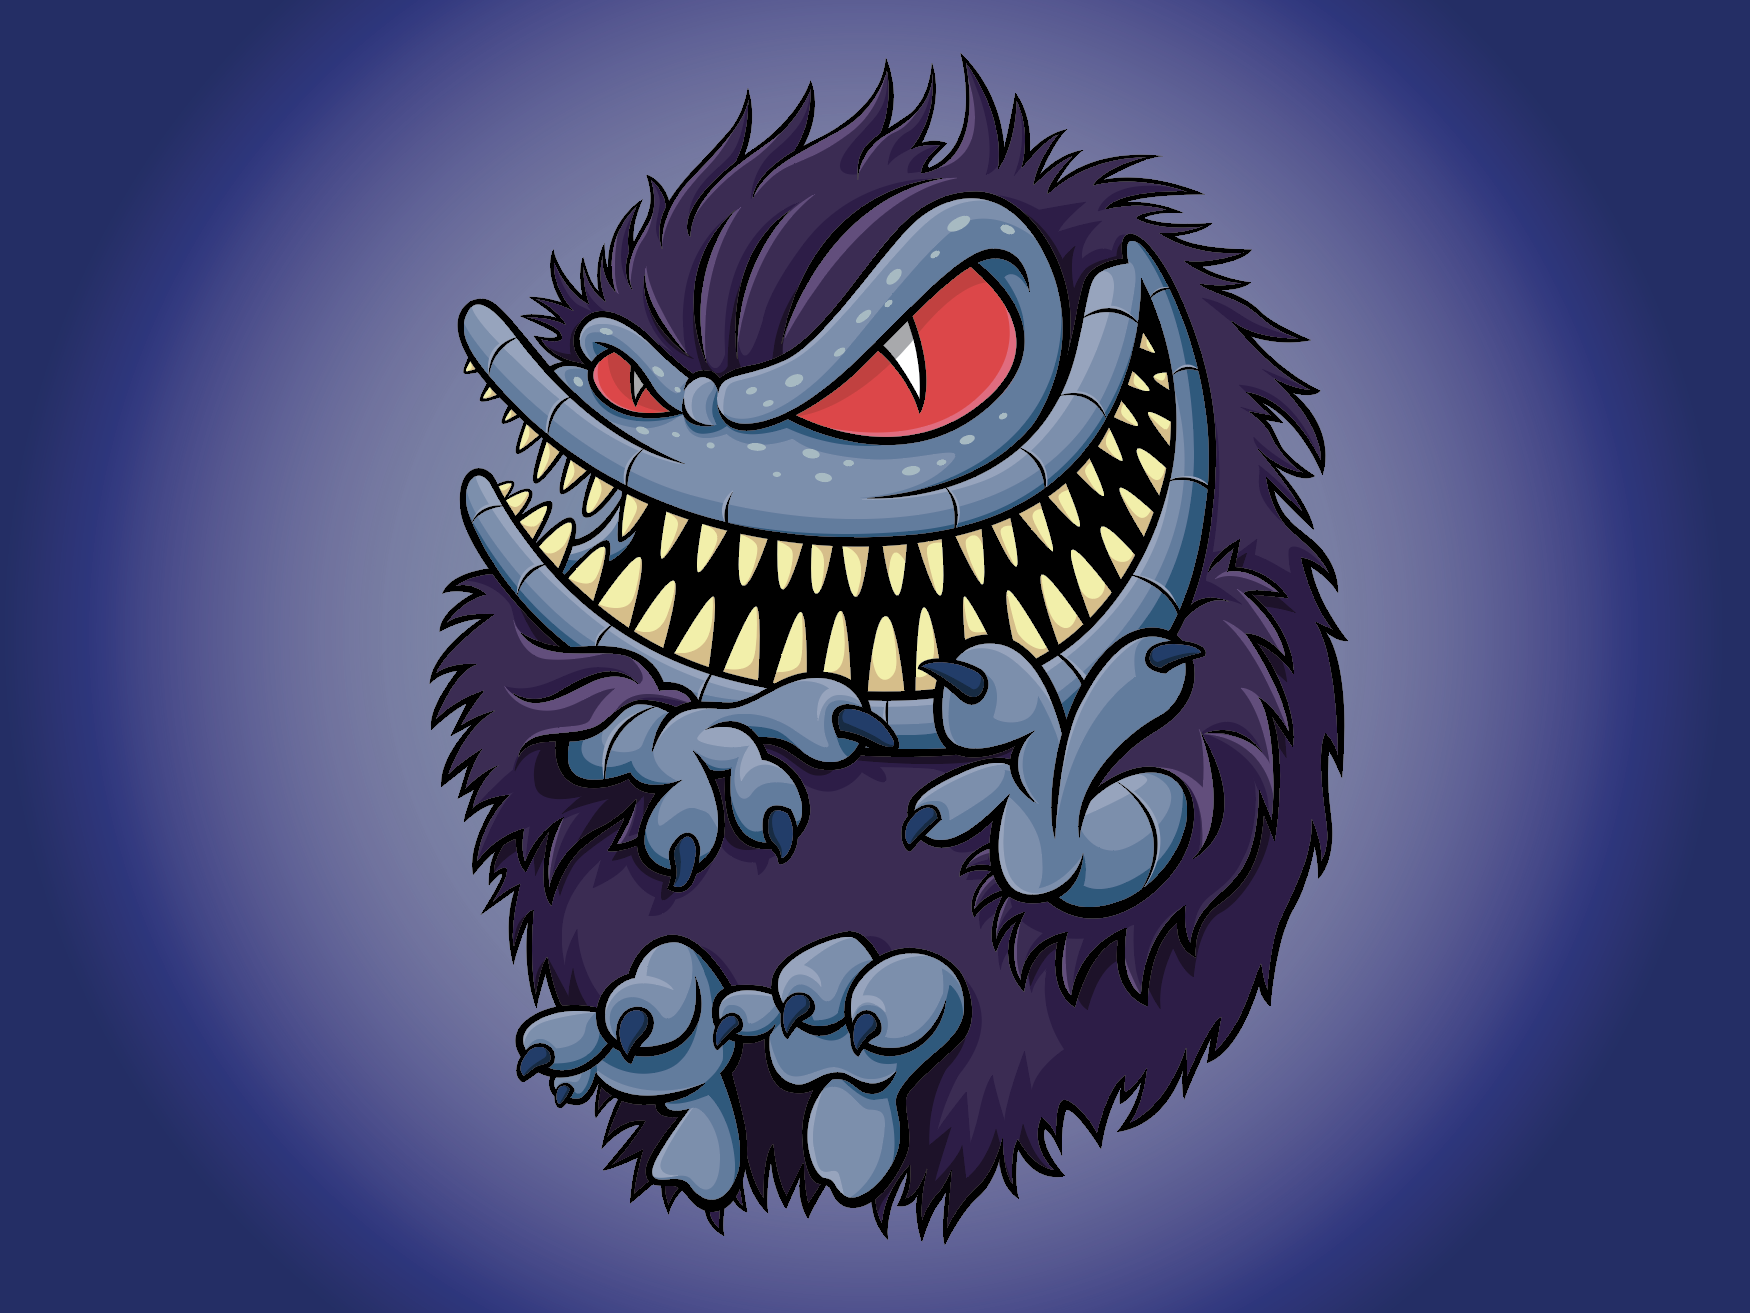 Critters Стикеры. Critters 2 1988 Постер. Catnap vs smiling critters